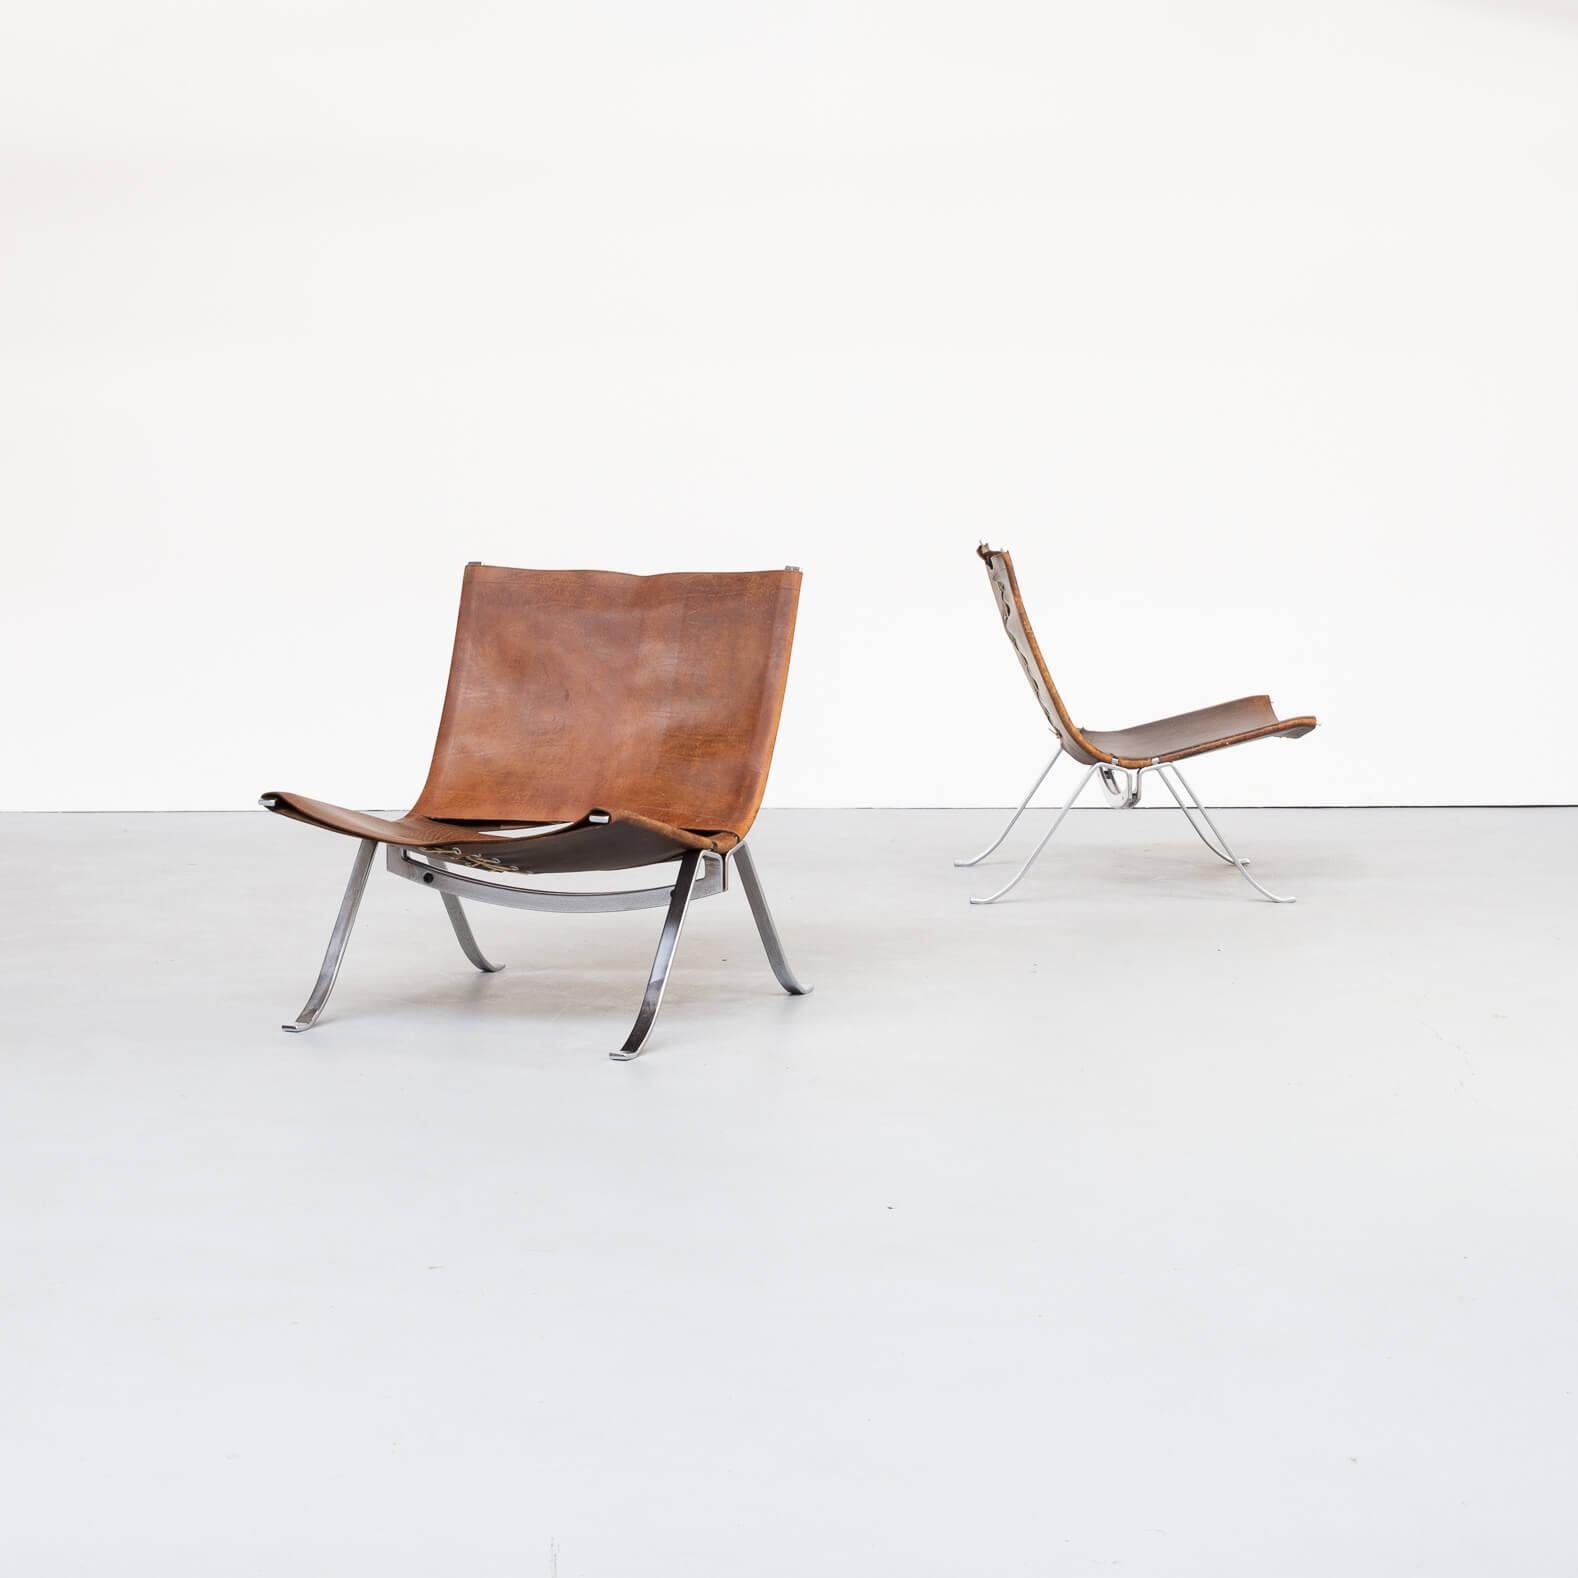 A pair of lounge chairs by Fabricius. The very well formed metal frames hold a sturdy brown leather upholstery, tied together with a rope. These very desirable and extremely rare and comfortable design chairs can be placed in the same range of